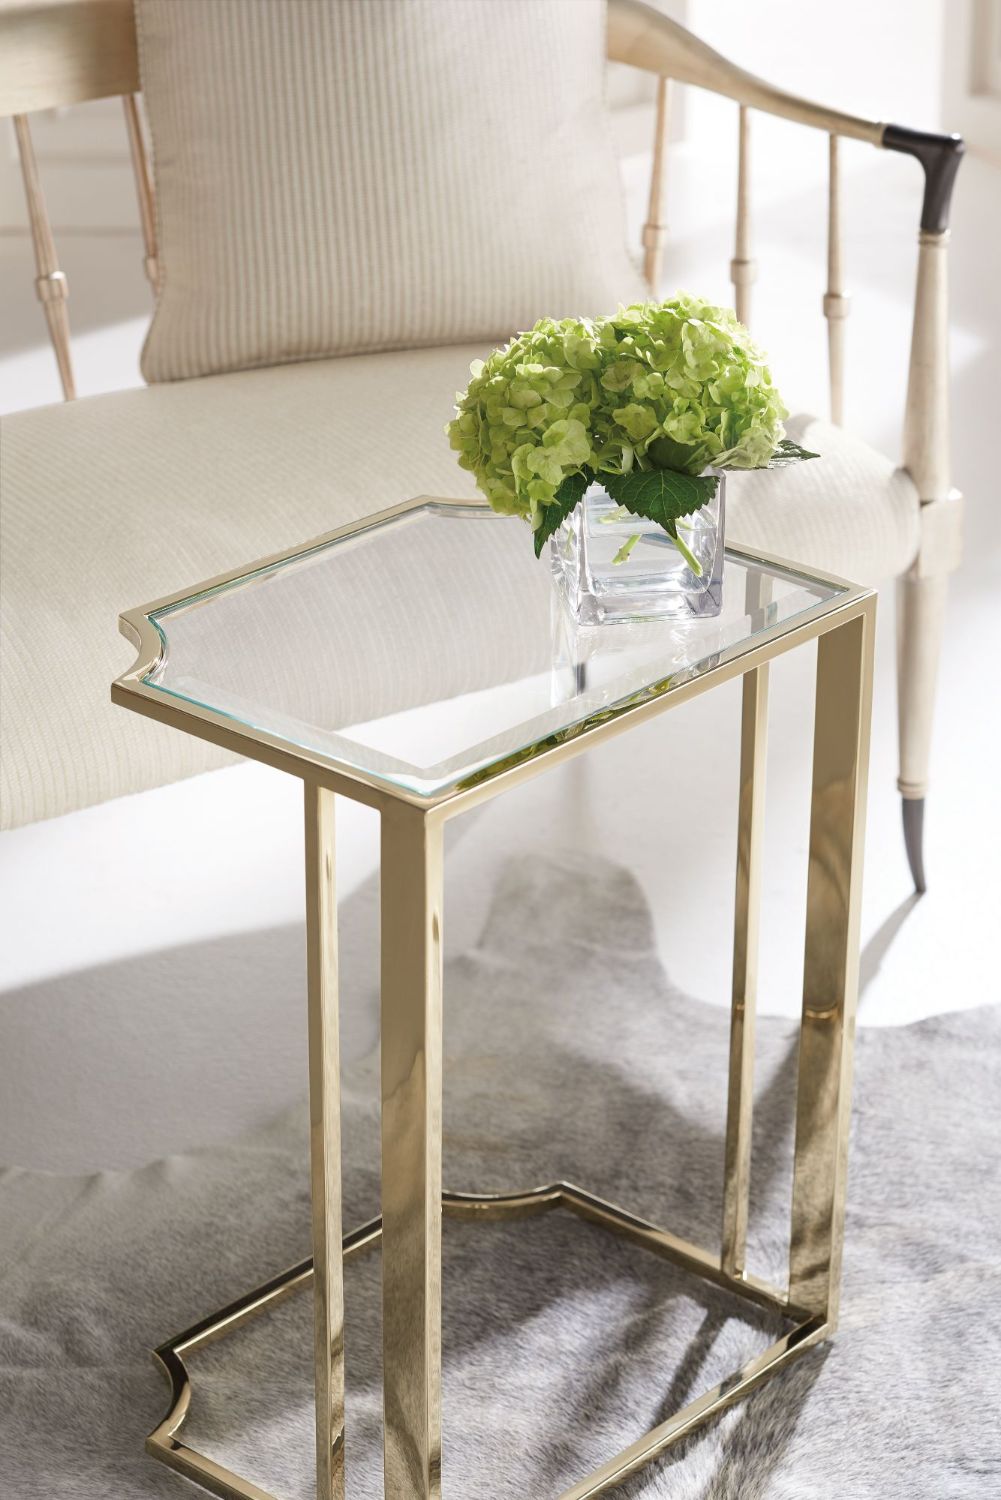  Caracole-Caracole Short and Sweet Side Table-Gold 957 